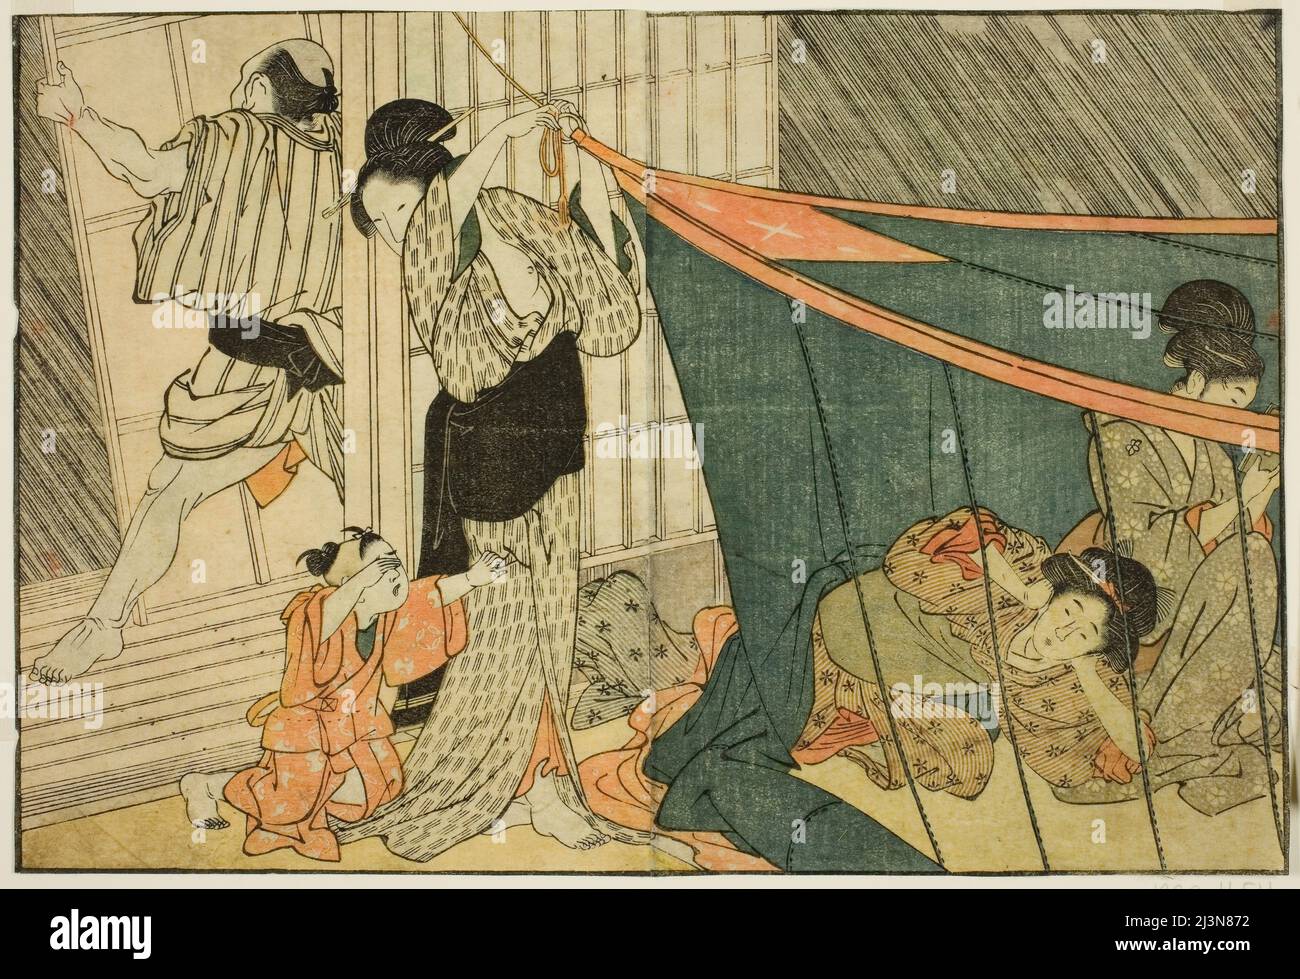 Women Inside a Mosquito Net during a Thunderstorm, dal libro illustrato "Picture Book: Flowers of the Four Seasons (Ehon shiki no hana)," vol. 1, Japan, New Year, 1801. Foto Stock